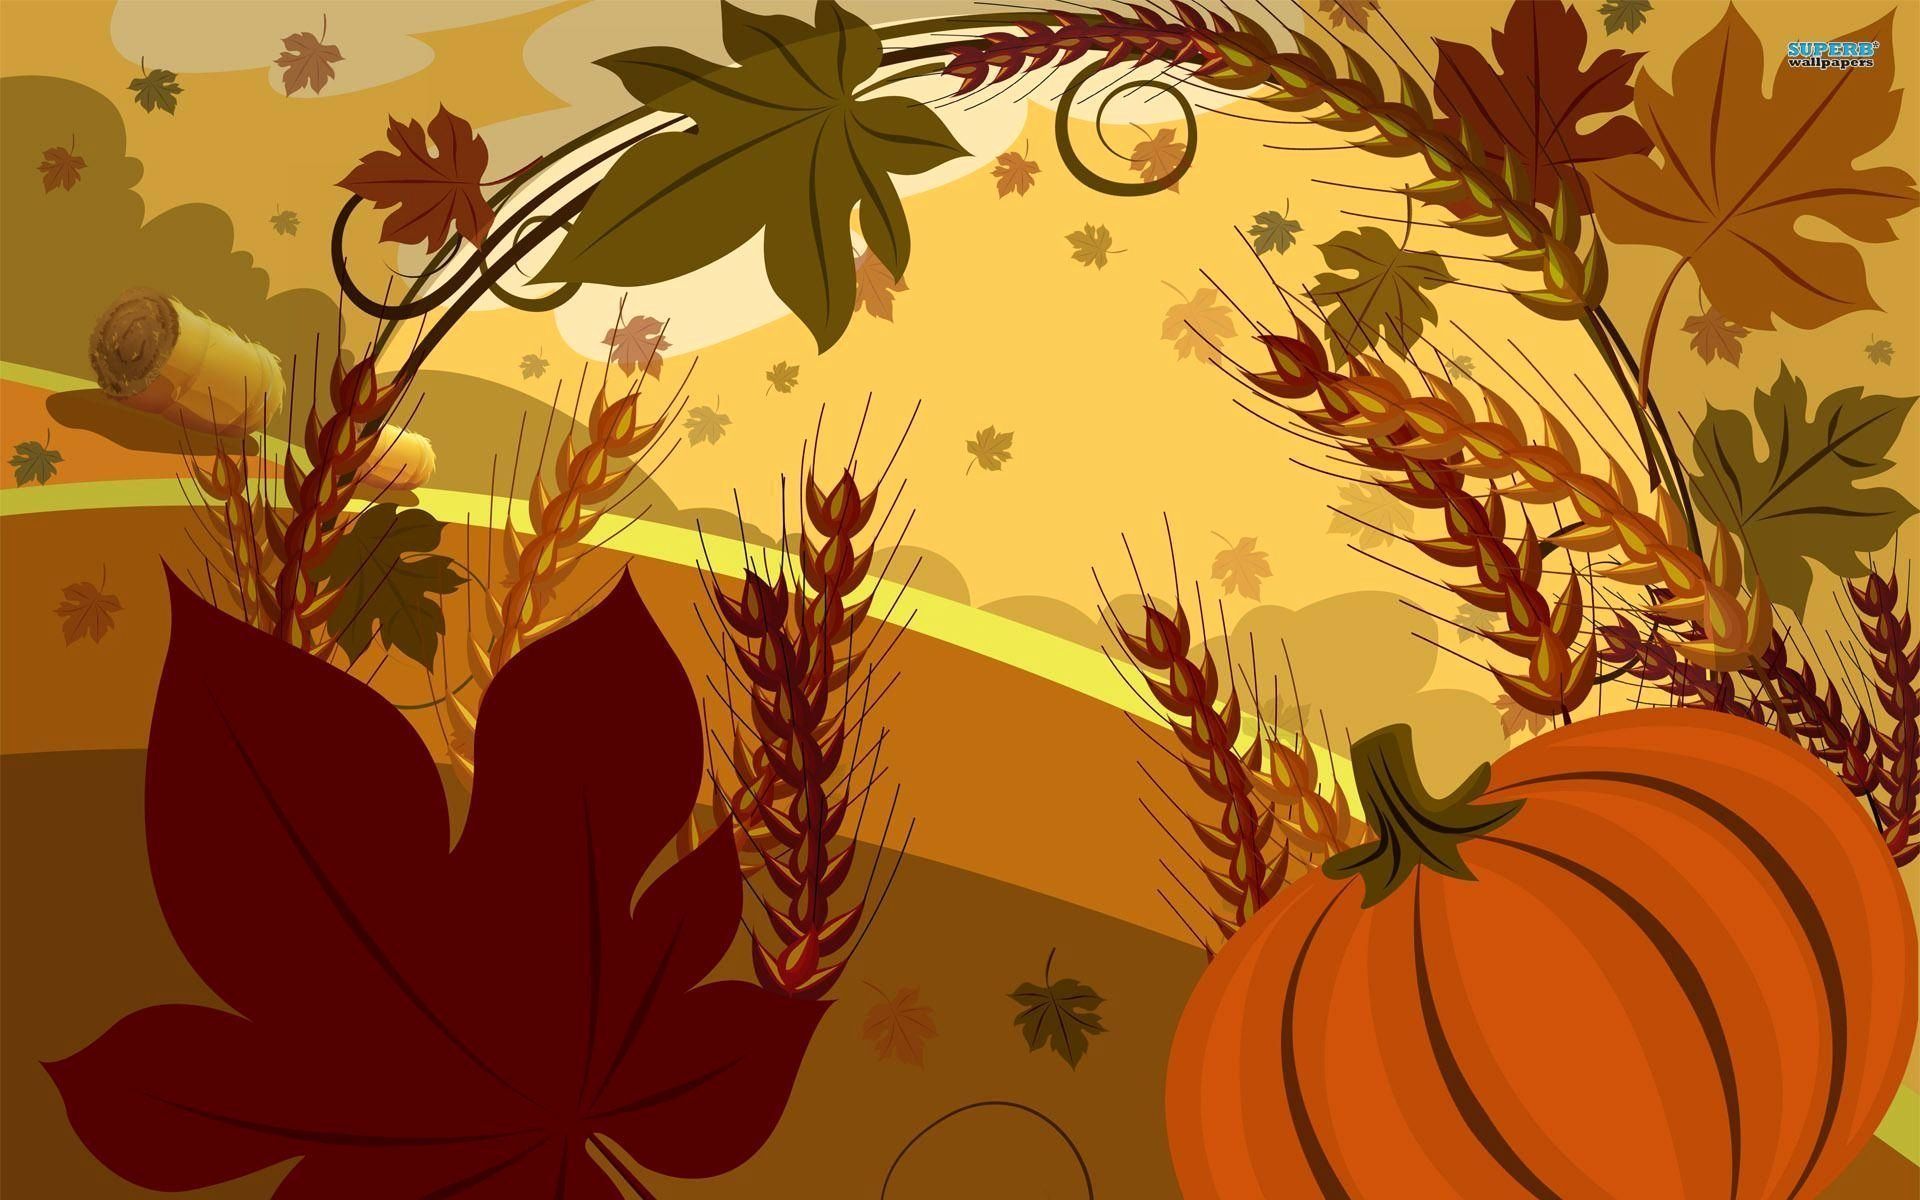 Cute Thanksgiving Background Awesome Cute Thanksgiving WallpaperDownload Free Stunning Background for Desktop and Mobile Devices Ideas of The Hudson